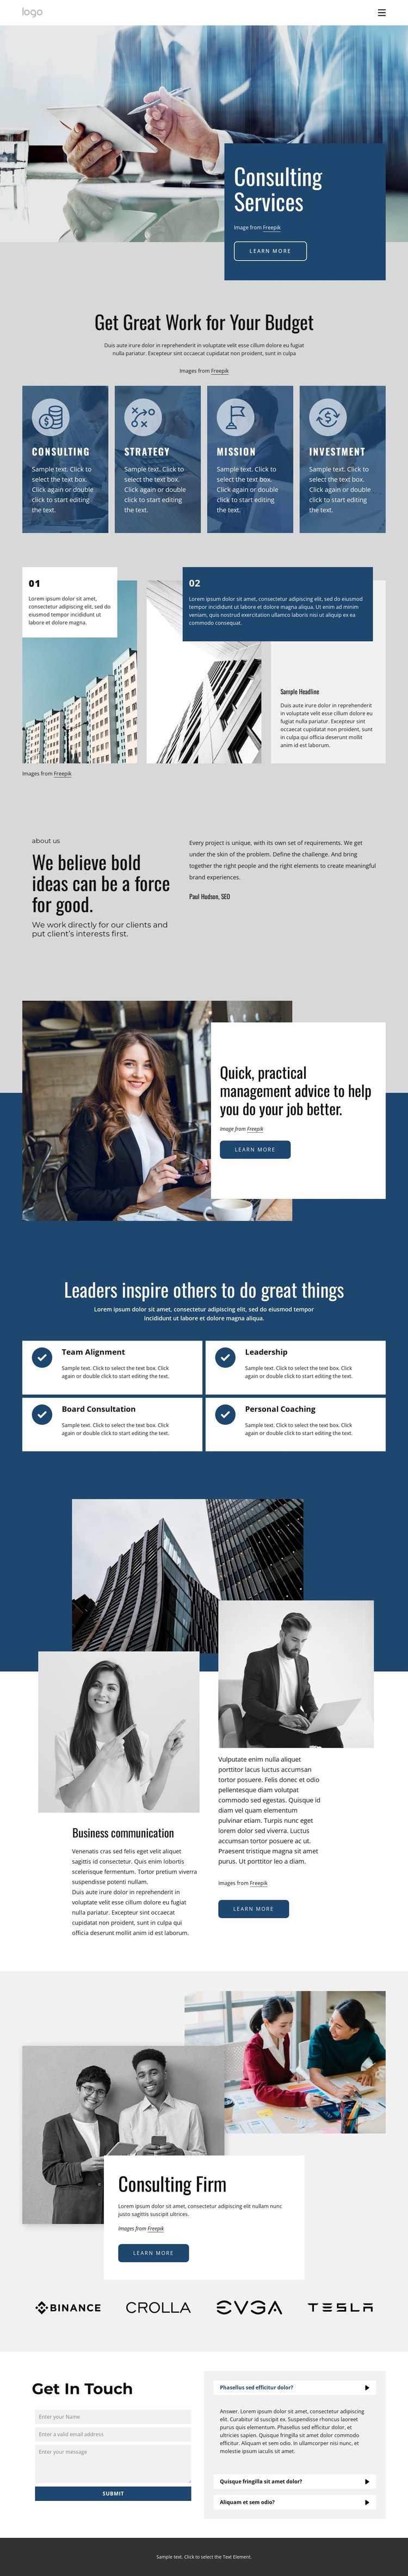 Professional consulting service firm WordPress Theme